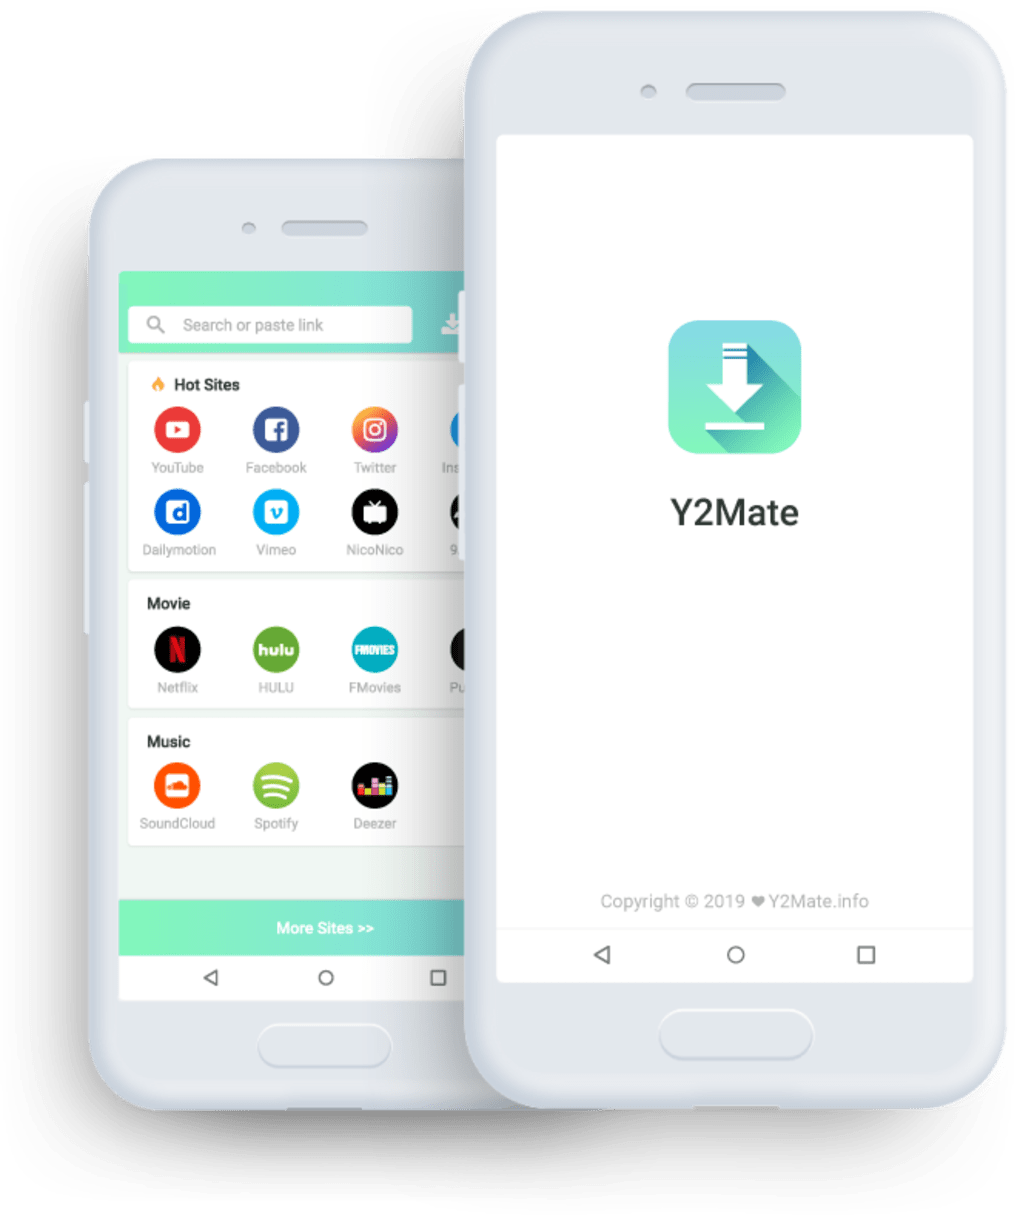 Download Y2Mate APK 2.3 for Android - Filehippo.com